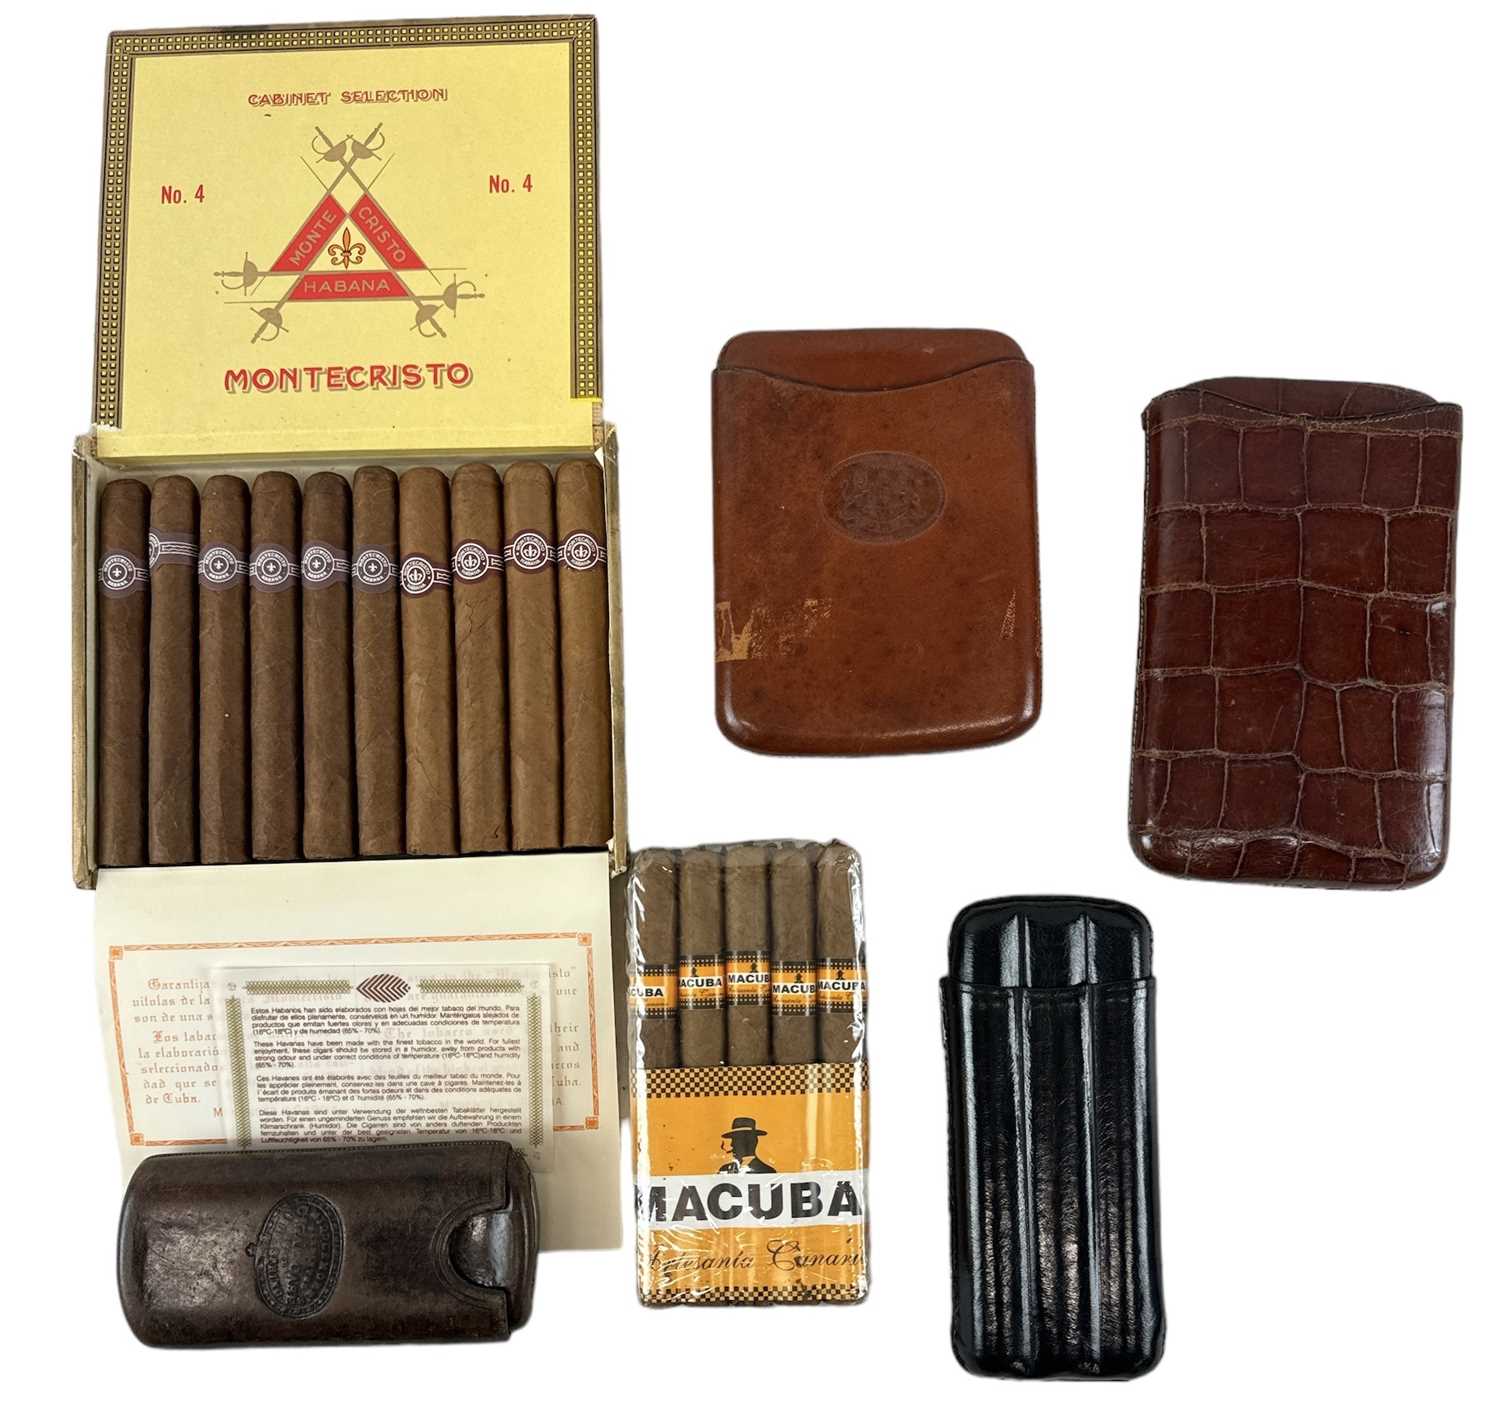 CIGARS; a box of ten Montecristo Habana No. 4 cigars, a pack of nine Macuba cigars and a group of